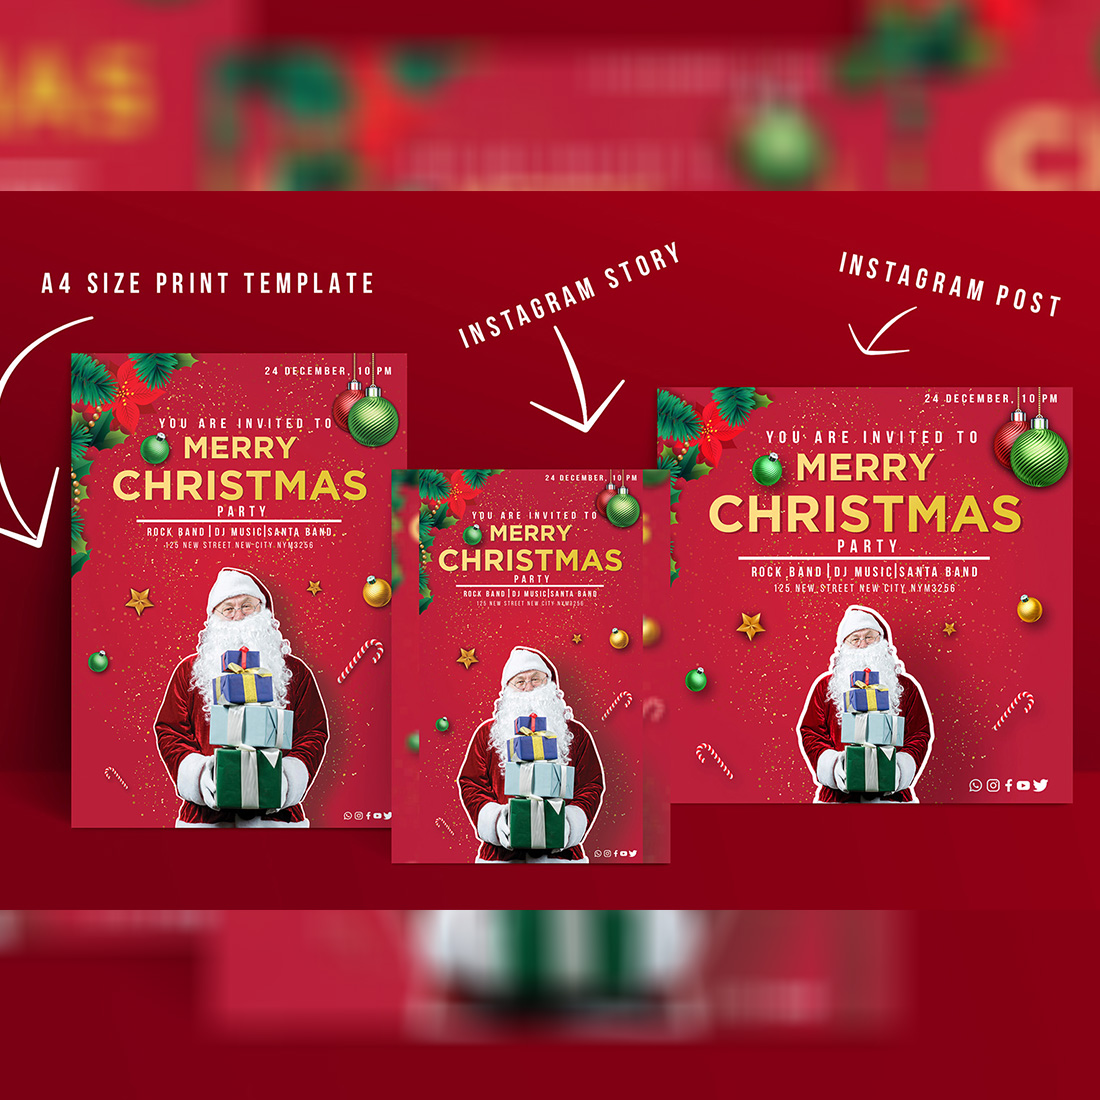 Christmas Party invitation Template Flyer main cover.